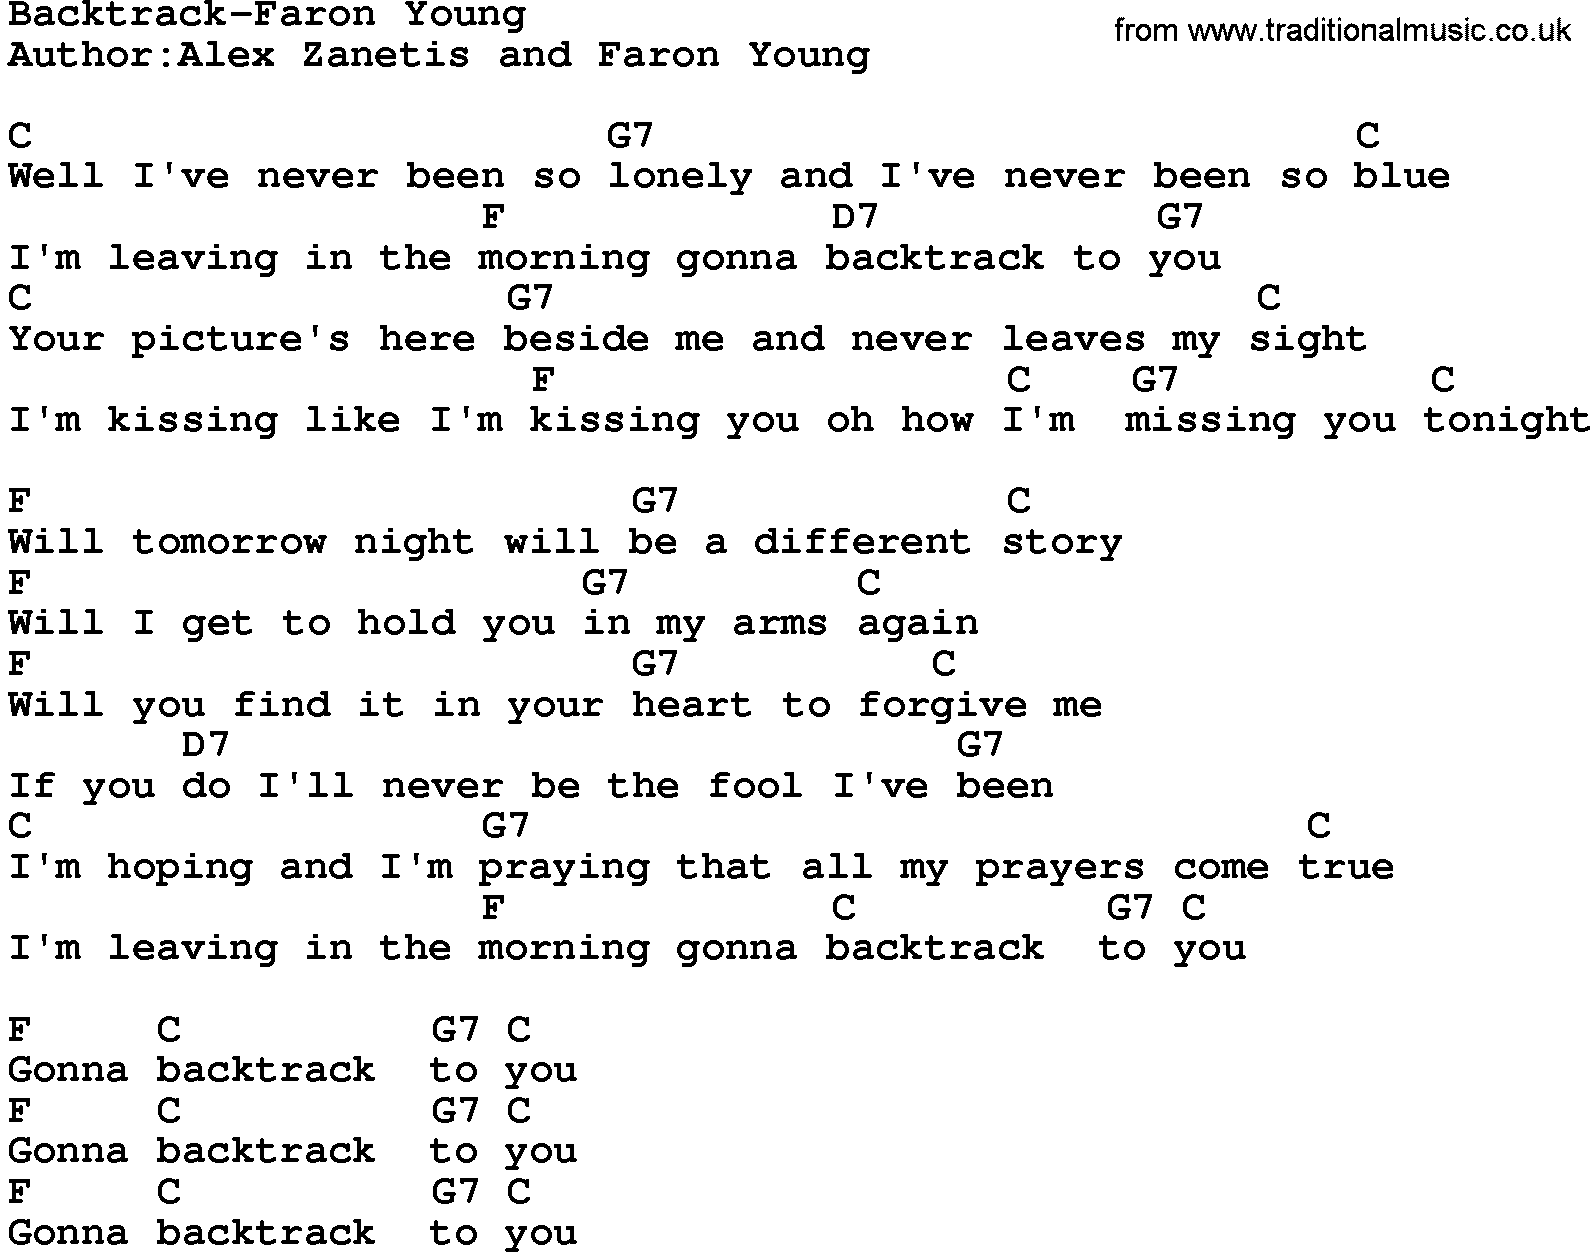 Country music song: Backtrack-Faron Young lyrics and chords